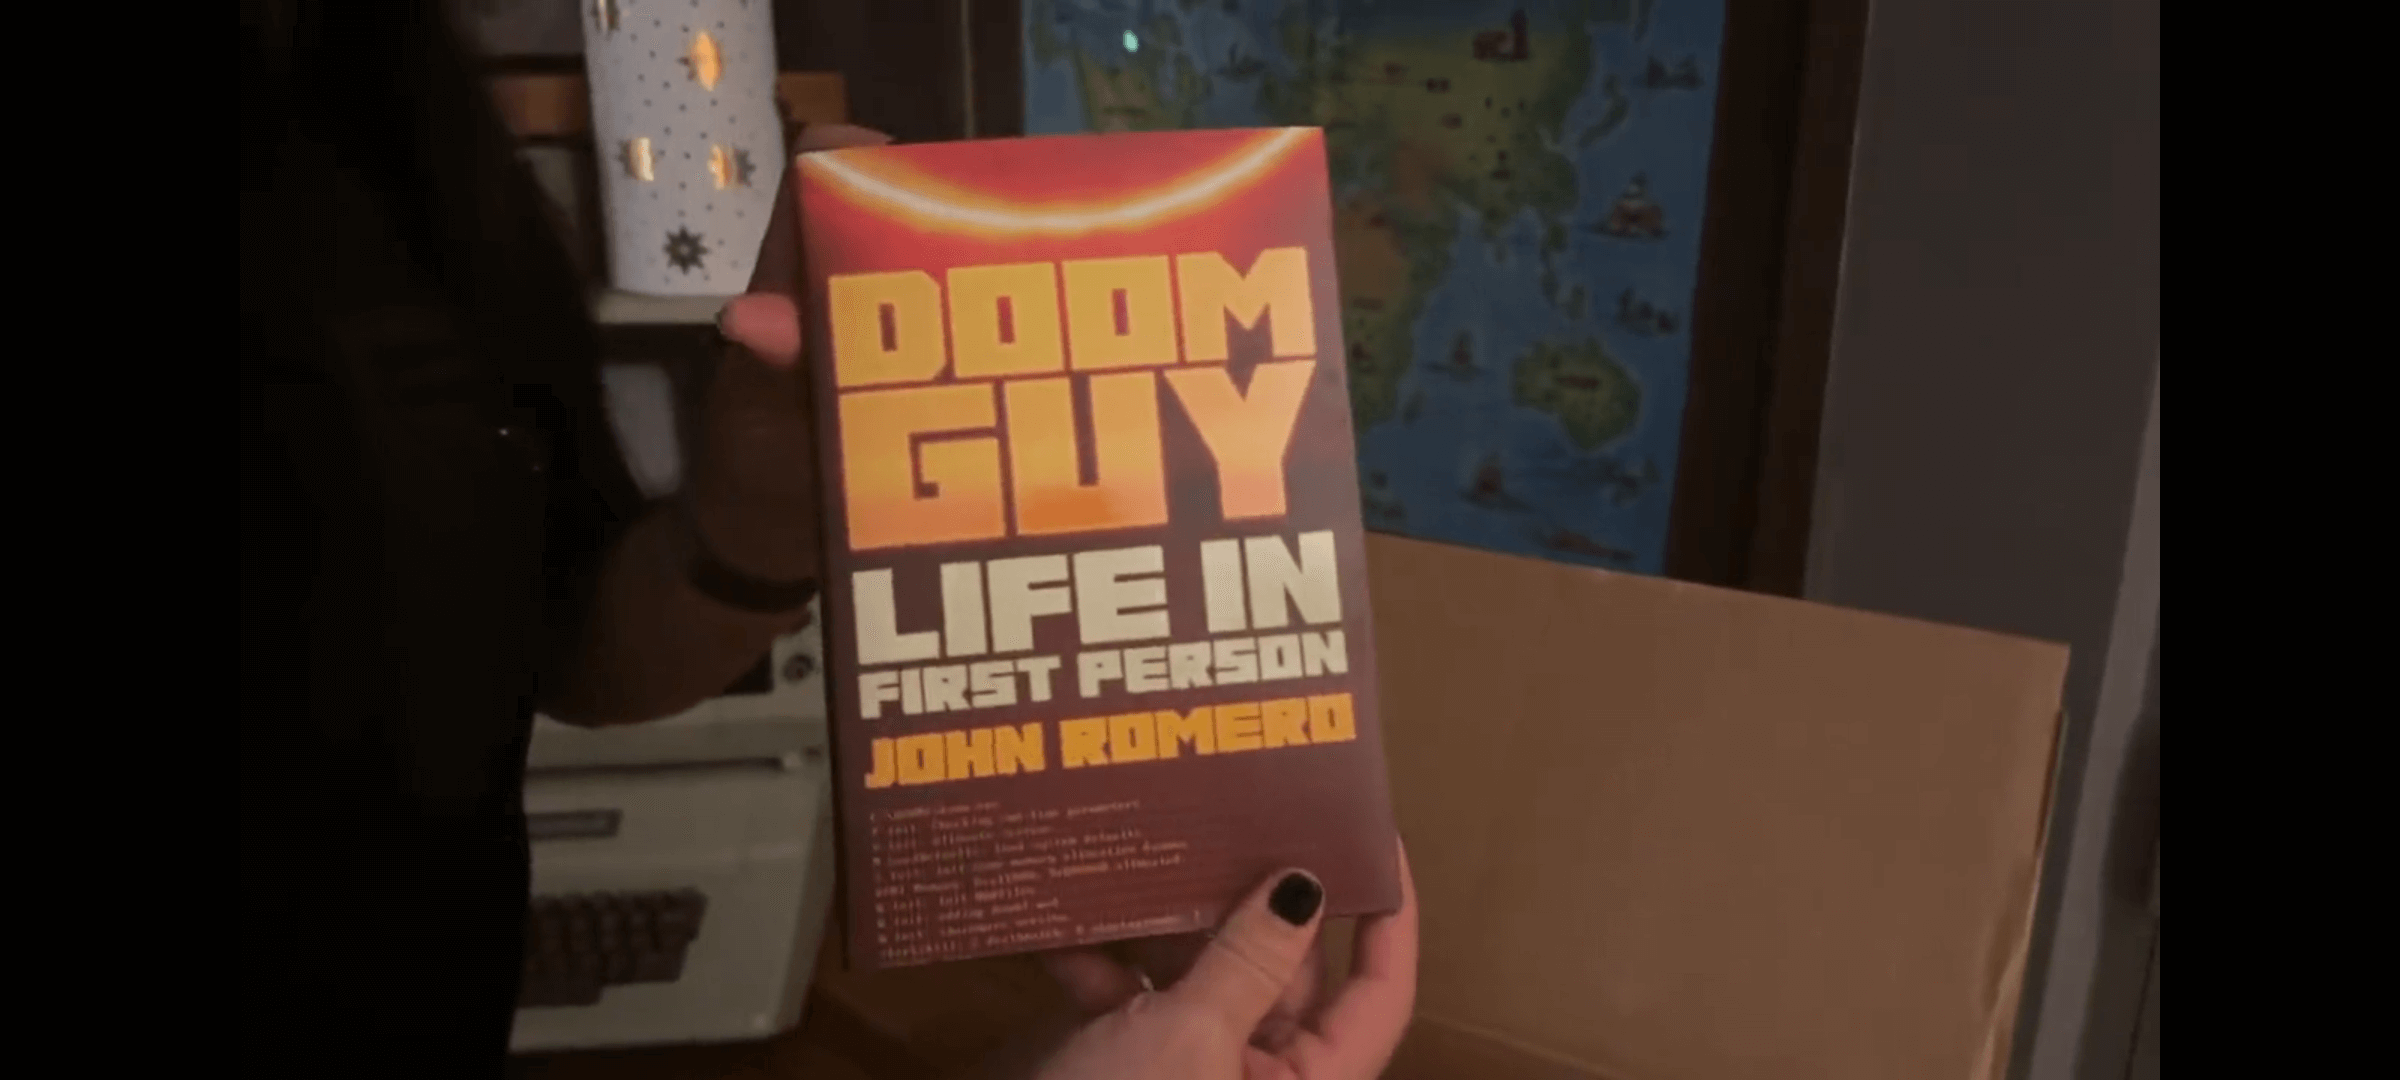 author John Romero holds his book Doom Guy Life in First Person in his hands